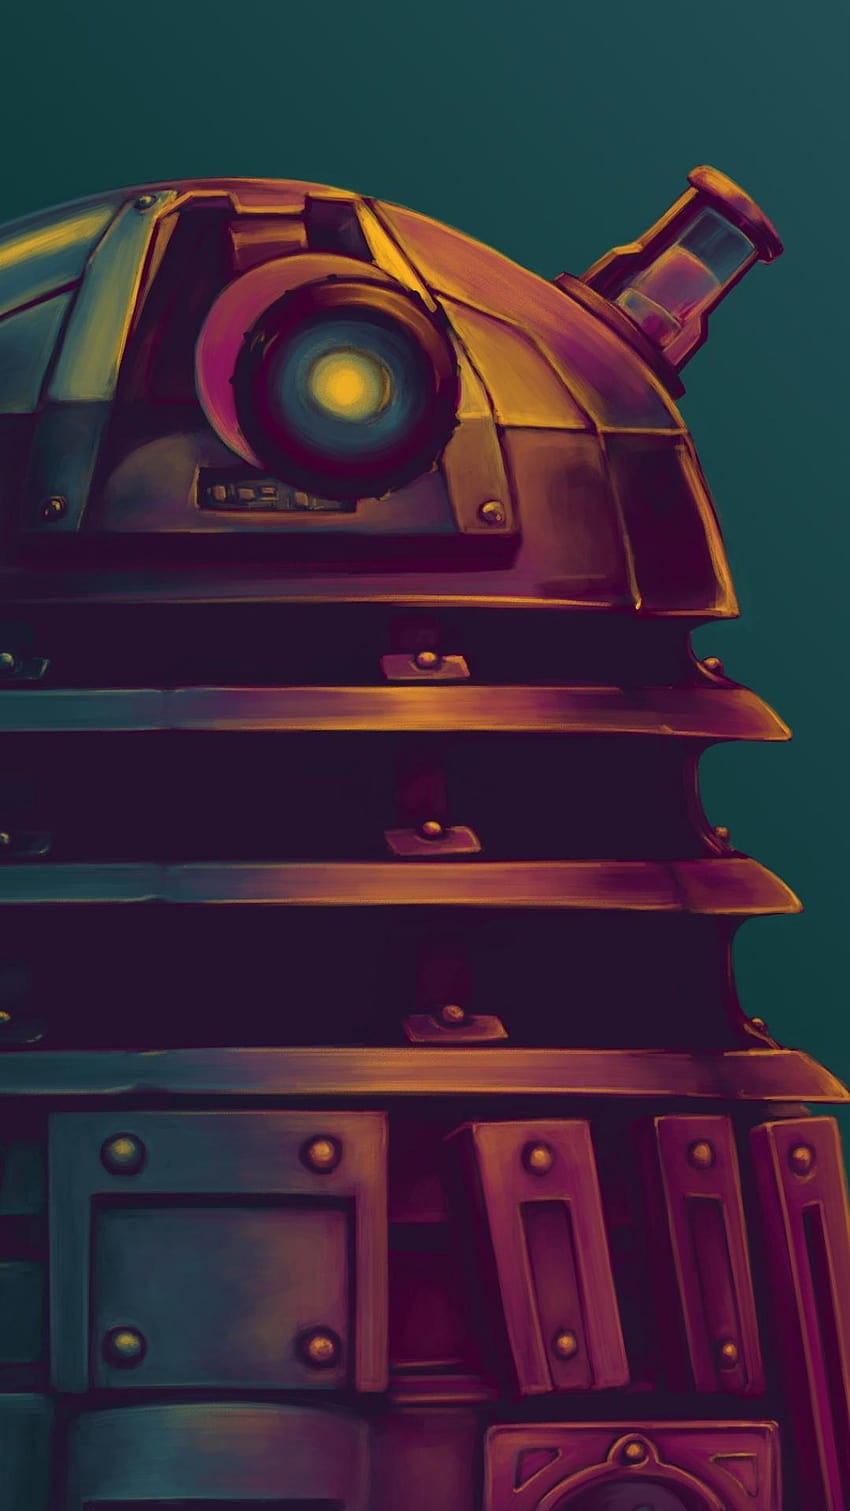 7 Doctor Who Phone, doctor who android HD phone wallpaper